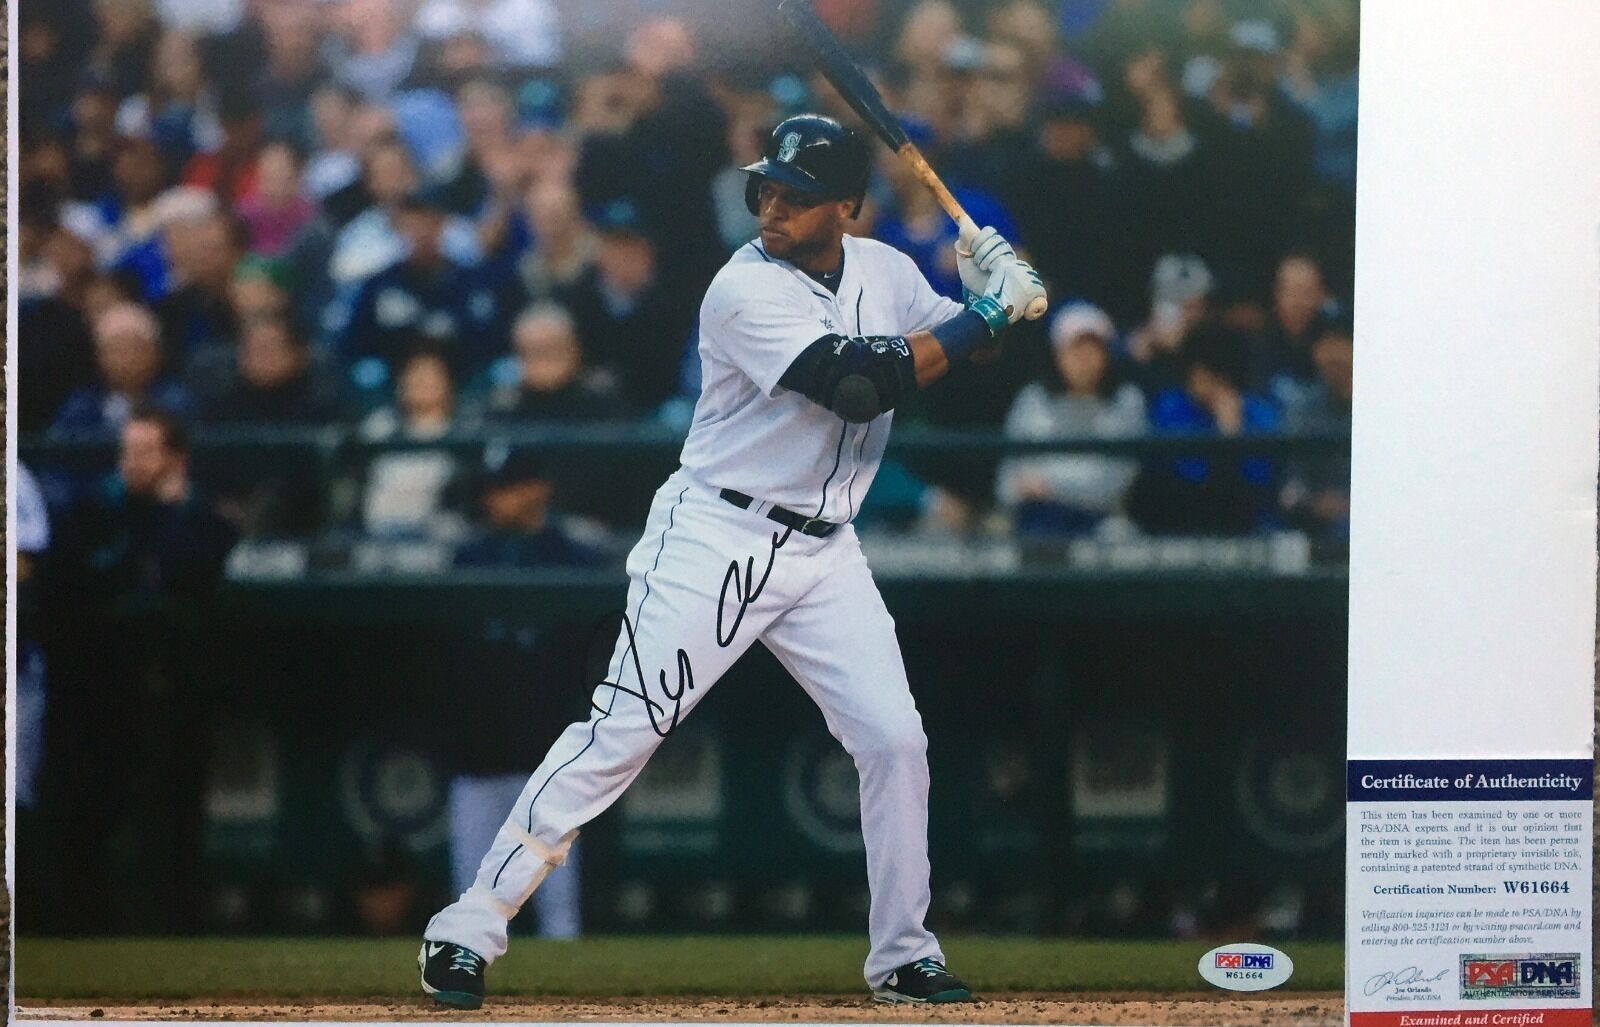 THE CANO SHOW!!! Robinson Cano Signed SEATTLE MARINERS 11x14 Photo Poster painting #1 PSA/DNA